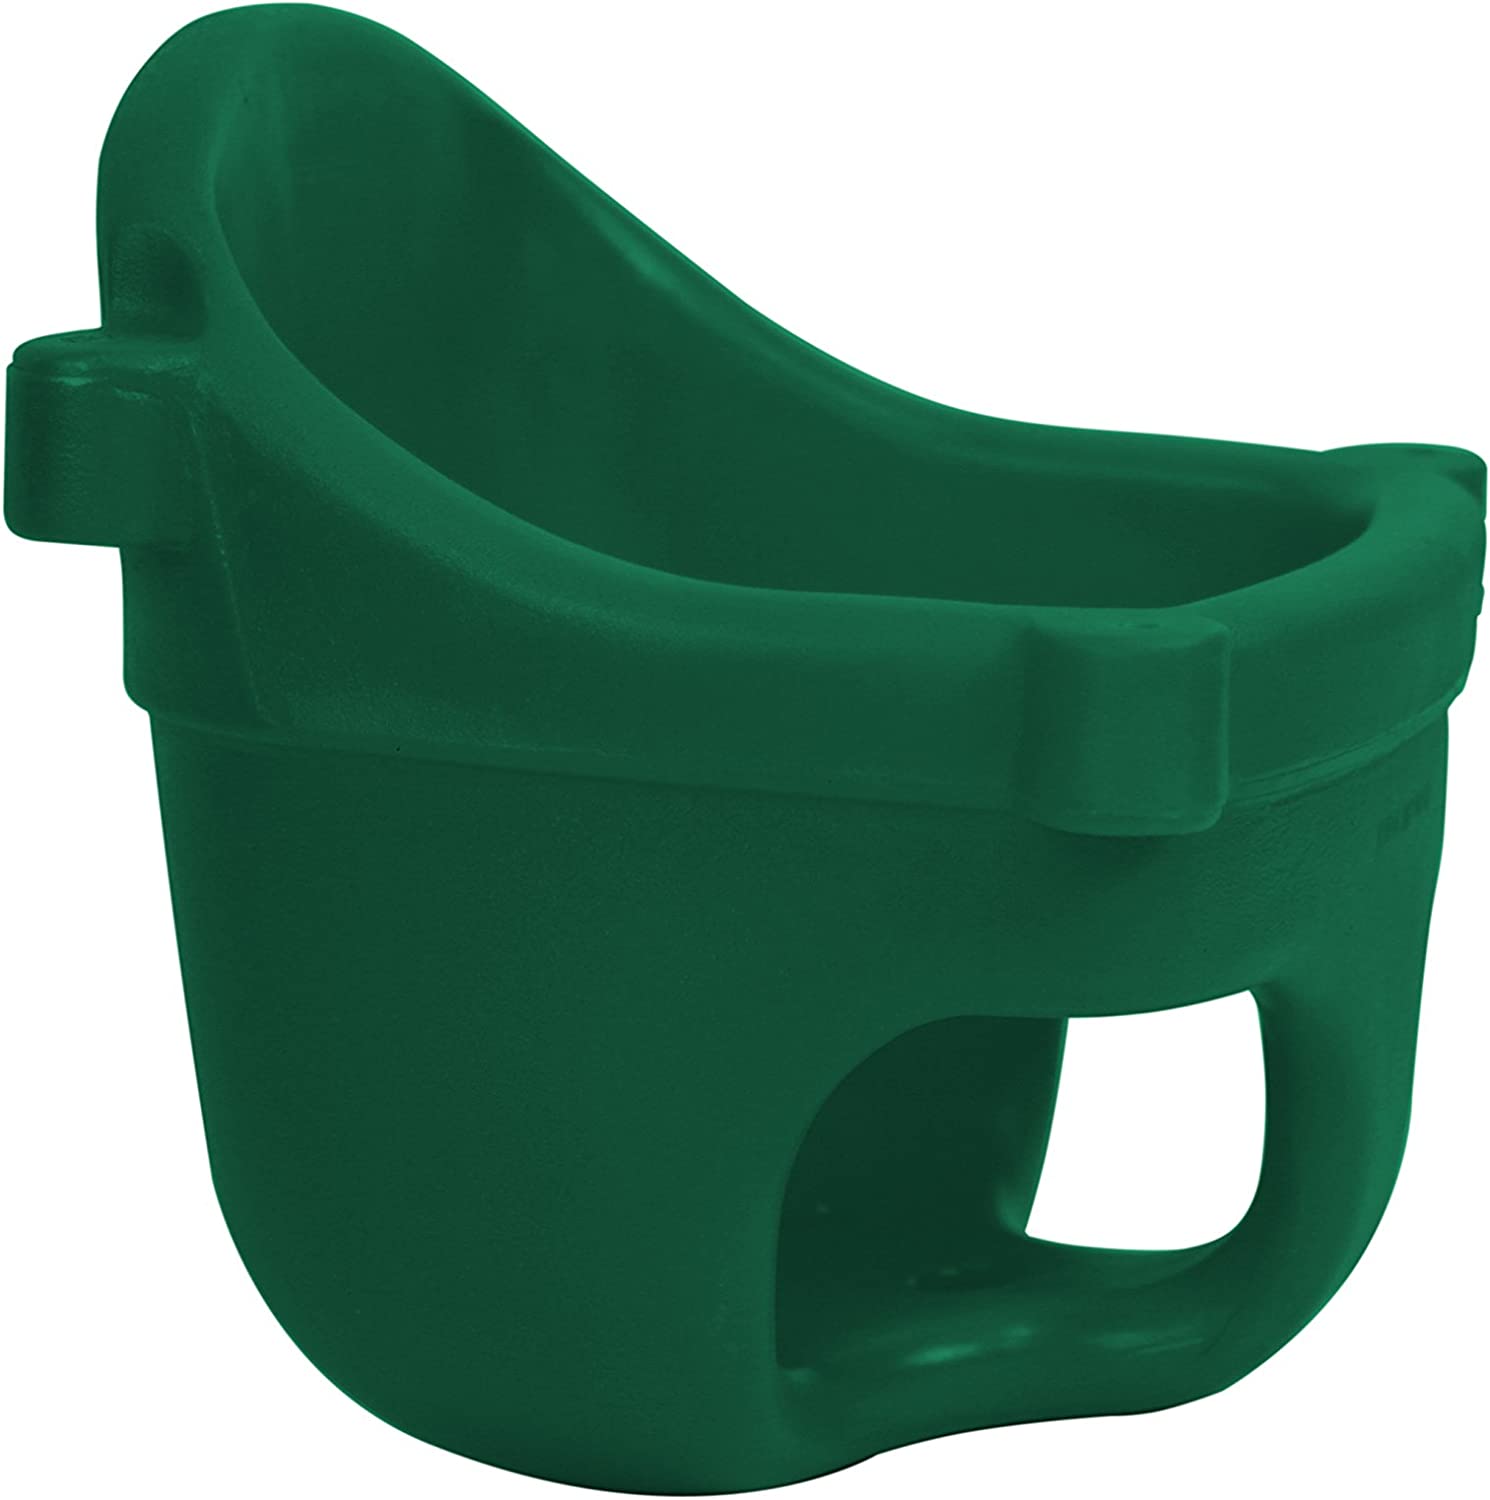 American Swing Green Toddler Full Bucket Roto-Molded Commerical or Residential